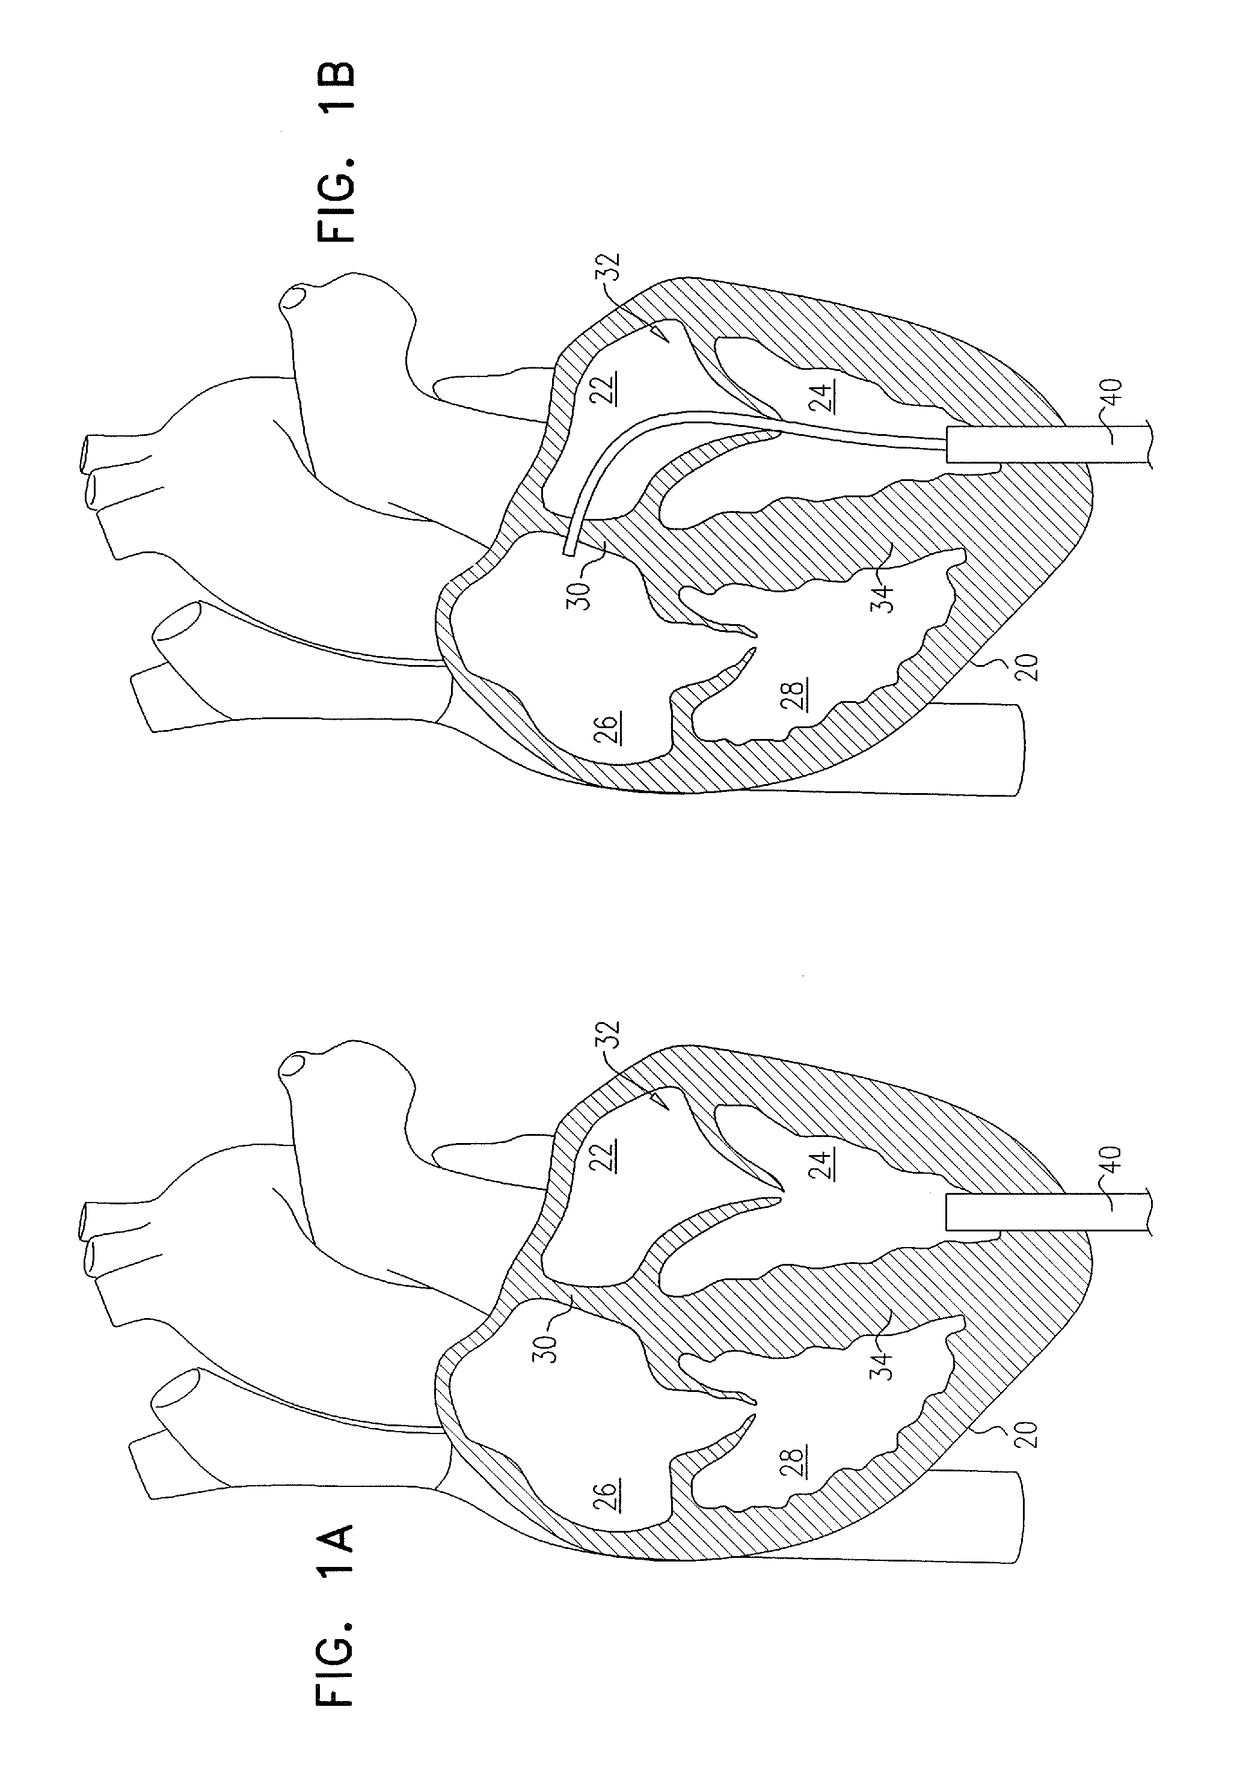 Techniques for providing a replacement valve and transseptal communication